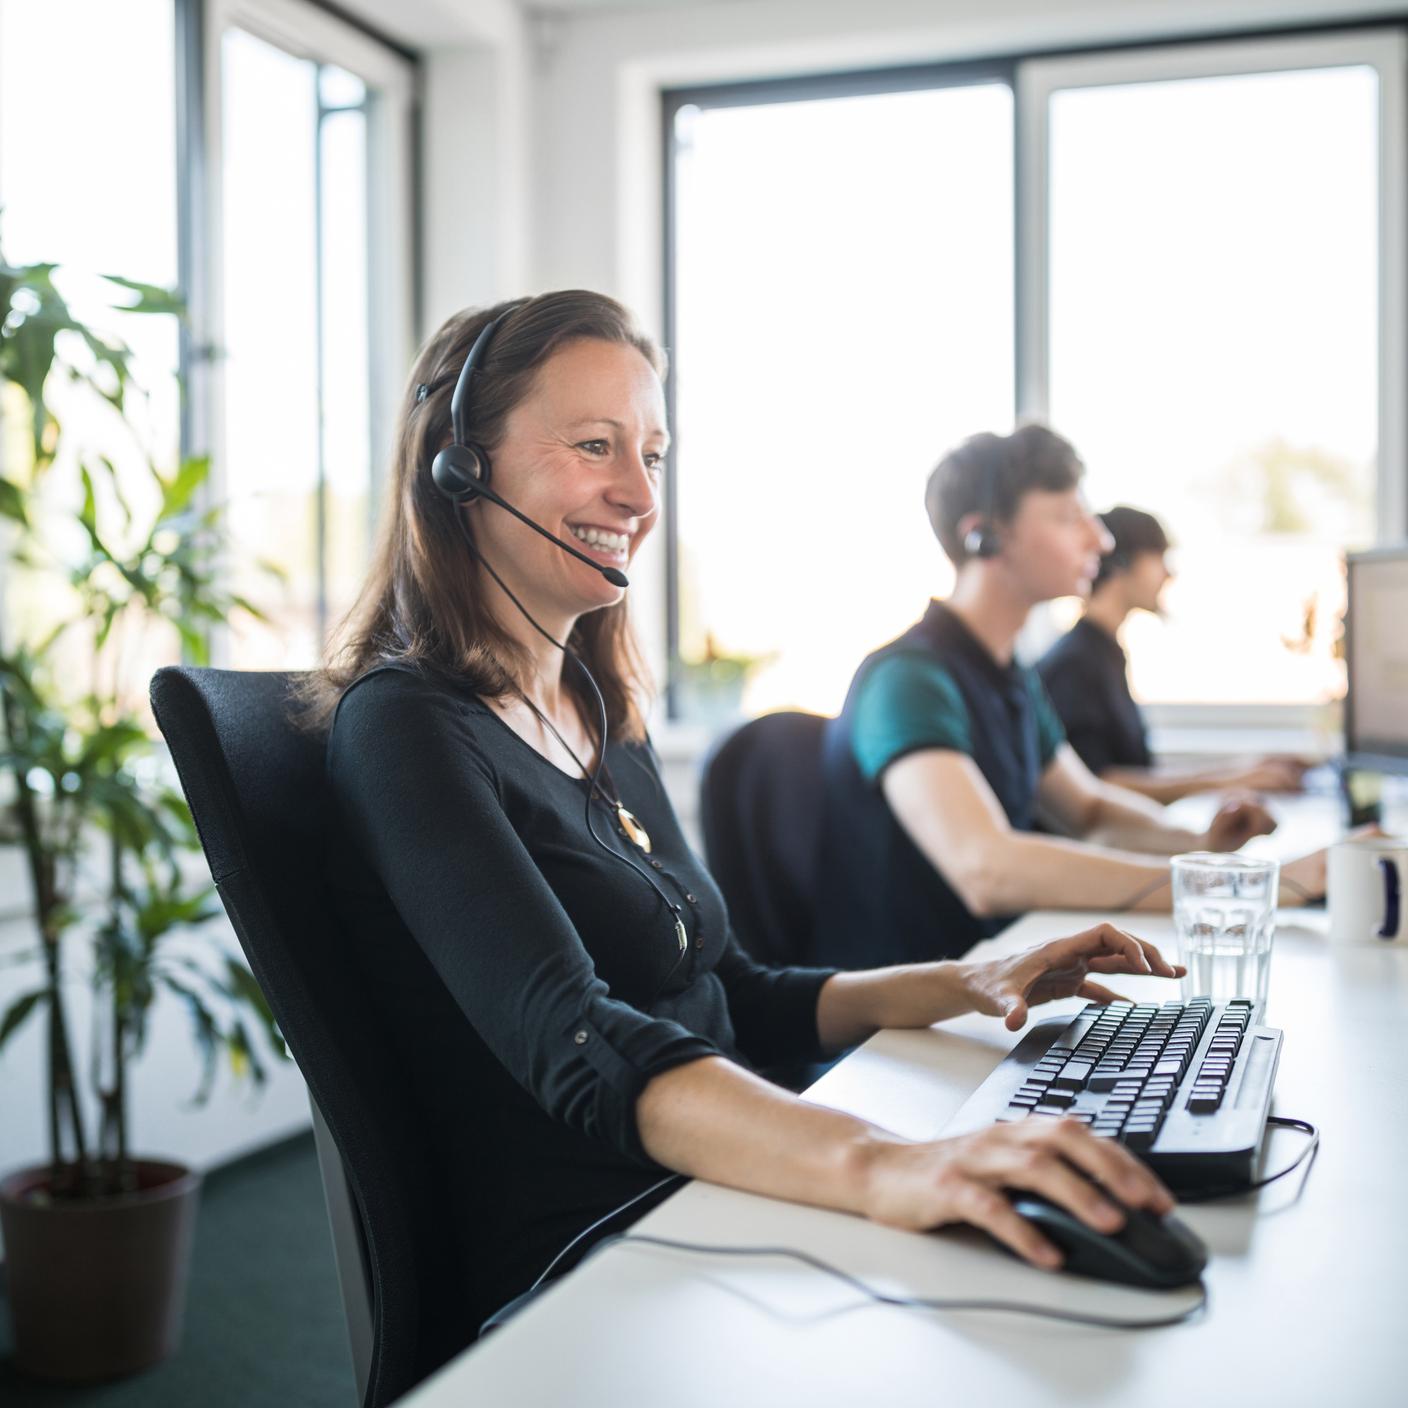 The New Inclusive Service Kitemark™ - Smiling female customer service representative wearing headset using computer at desk in office